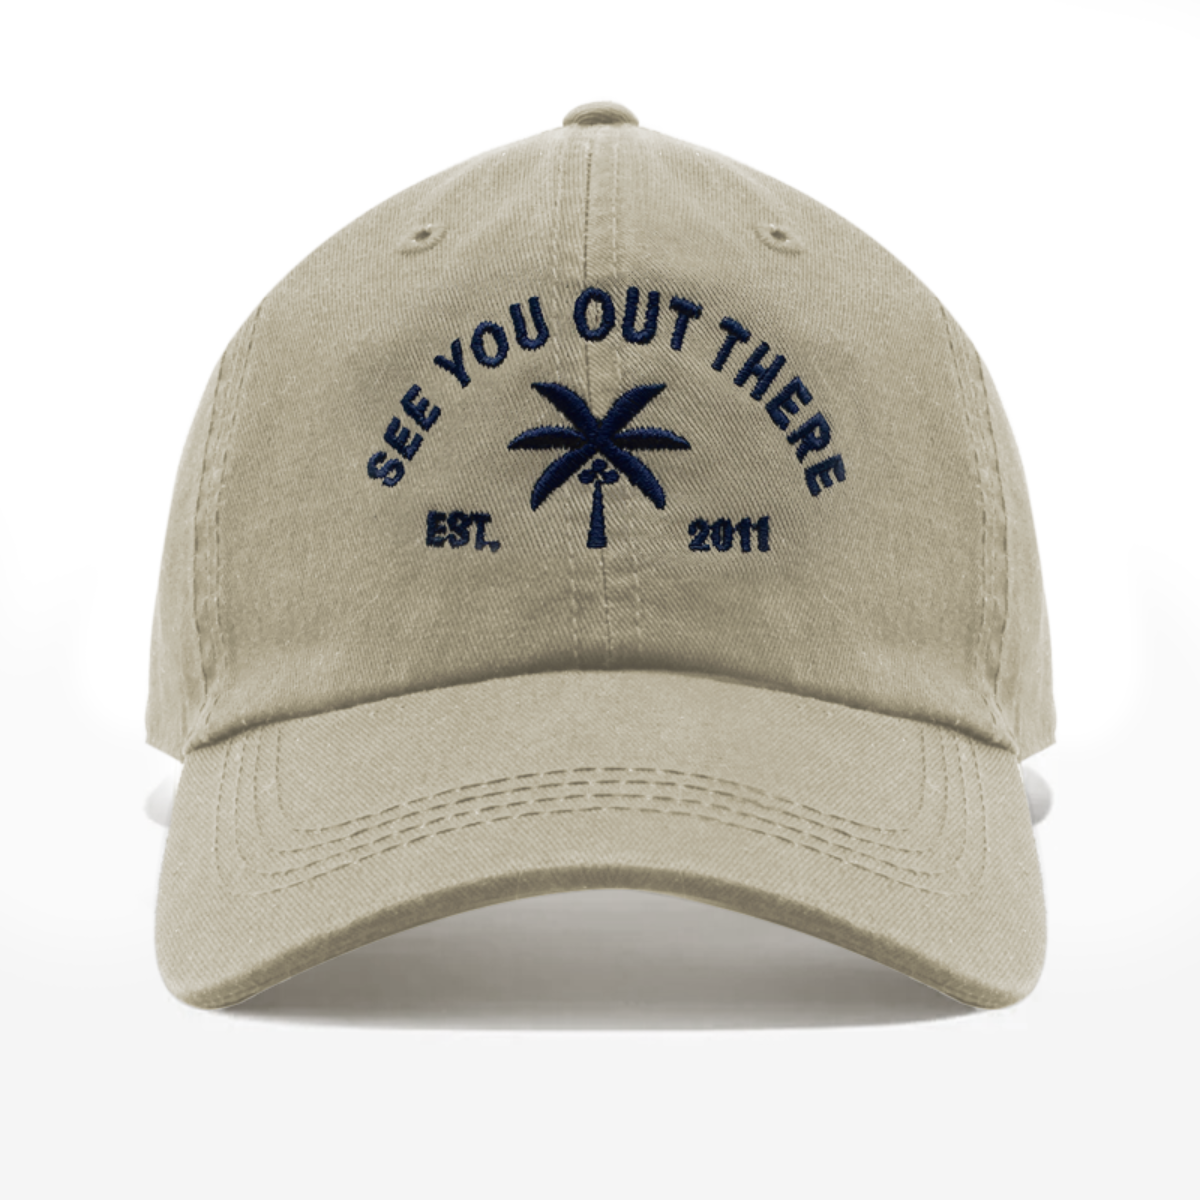 See You Out There Hat - Front